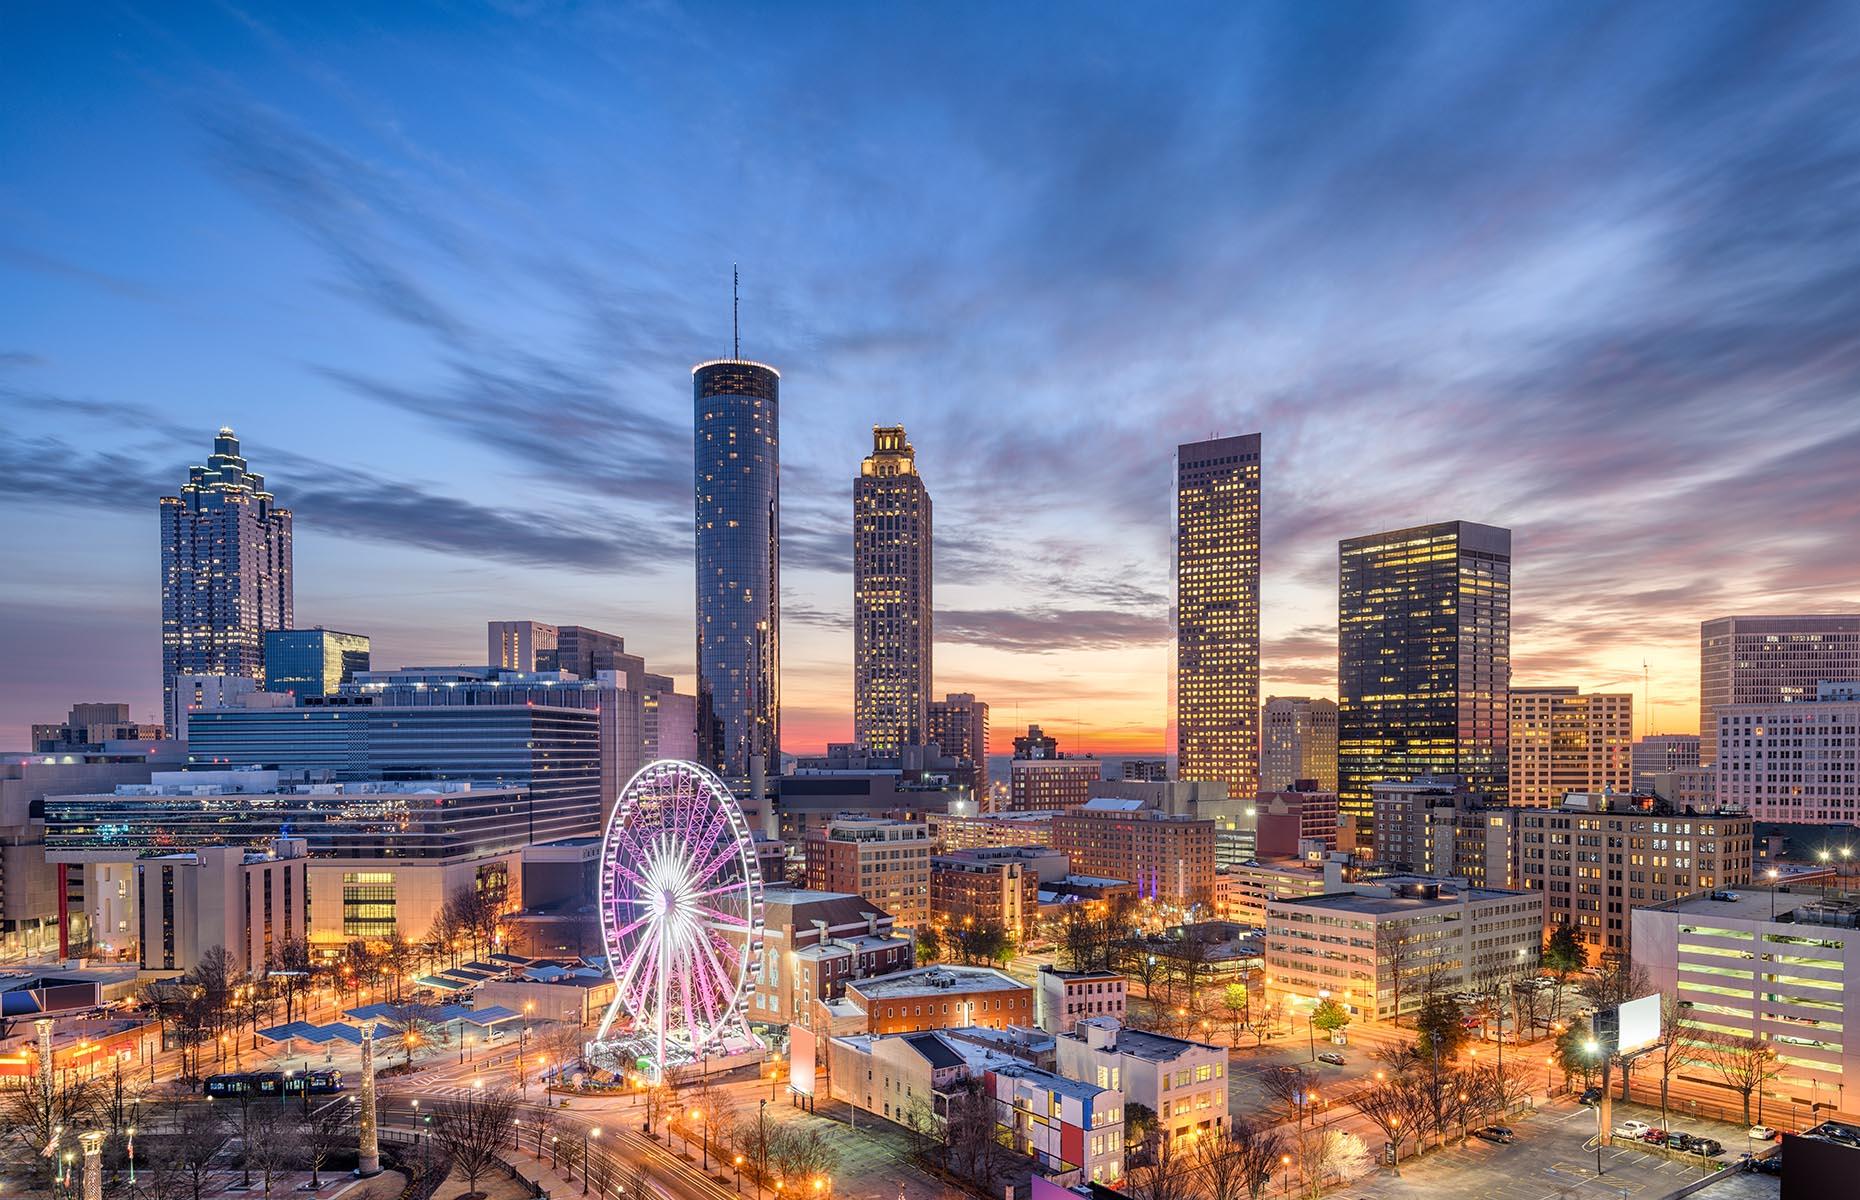 <p>The capital of Georgia, <a href="https://www.loveexploring.com/guides/75036/explore-atlanta-the-top-things-to-do-where-to-stay-what-to-eat">Atlanta</a> has everything from top-notch historic attractions to exceptional food and family-friendly attractions to offer. An important location in both the Civil War and the 1960s Civil Rights Movement, the city's history is best chronicled at the <a href="https://www.atlantahistorycenter.com/">Atlanta History Center</a>. Kids will love <a href="https://www.georgiaaquarium.org/">Georgia Aquarium</a> and <a href="https://zooatlanta.org/">Zoo Atlanta</a> (both Association of Zoos and Aquariums accredited), while foodies will appreciate the city's plentiful offering of everything from exceptional comfort food to fantastic fine dining. Get <a href="https://www.atlanta.net/coronavirus/">the latest travel information here</a>.</p>